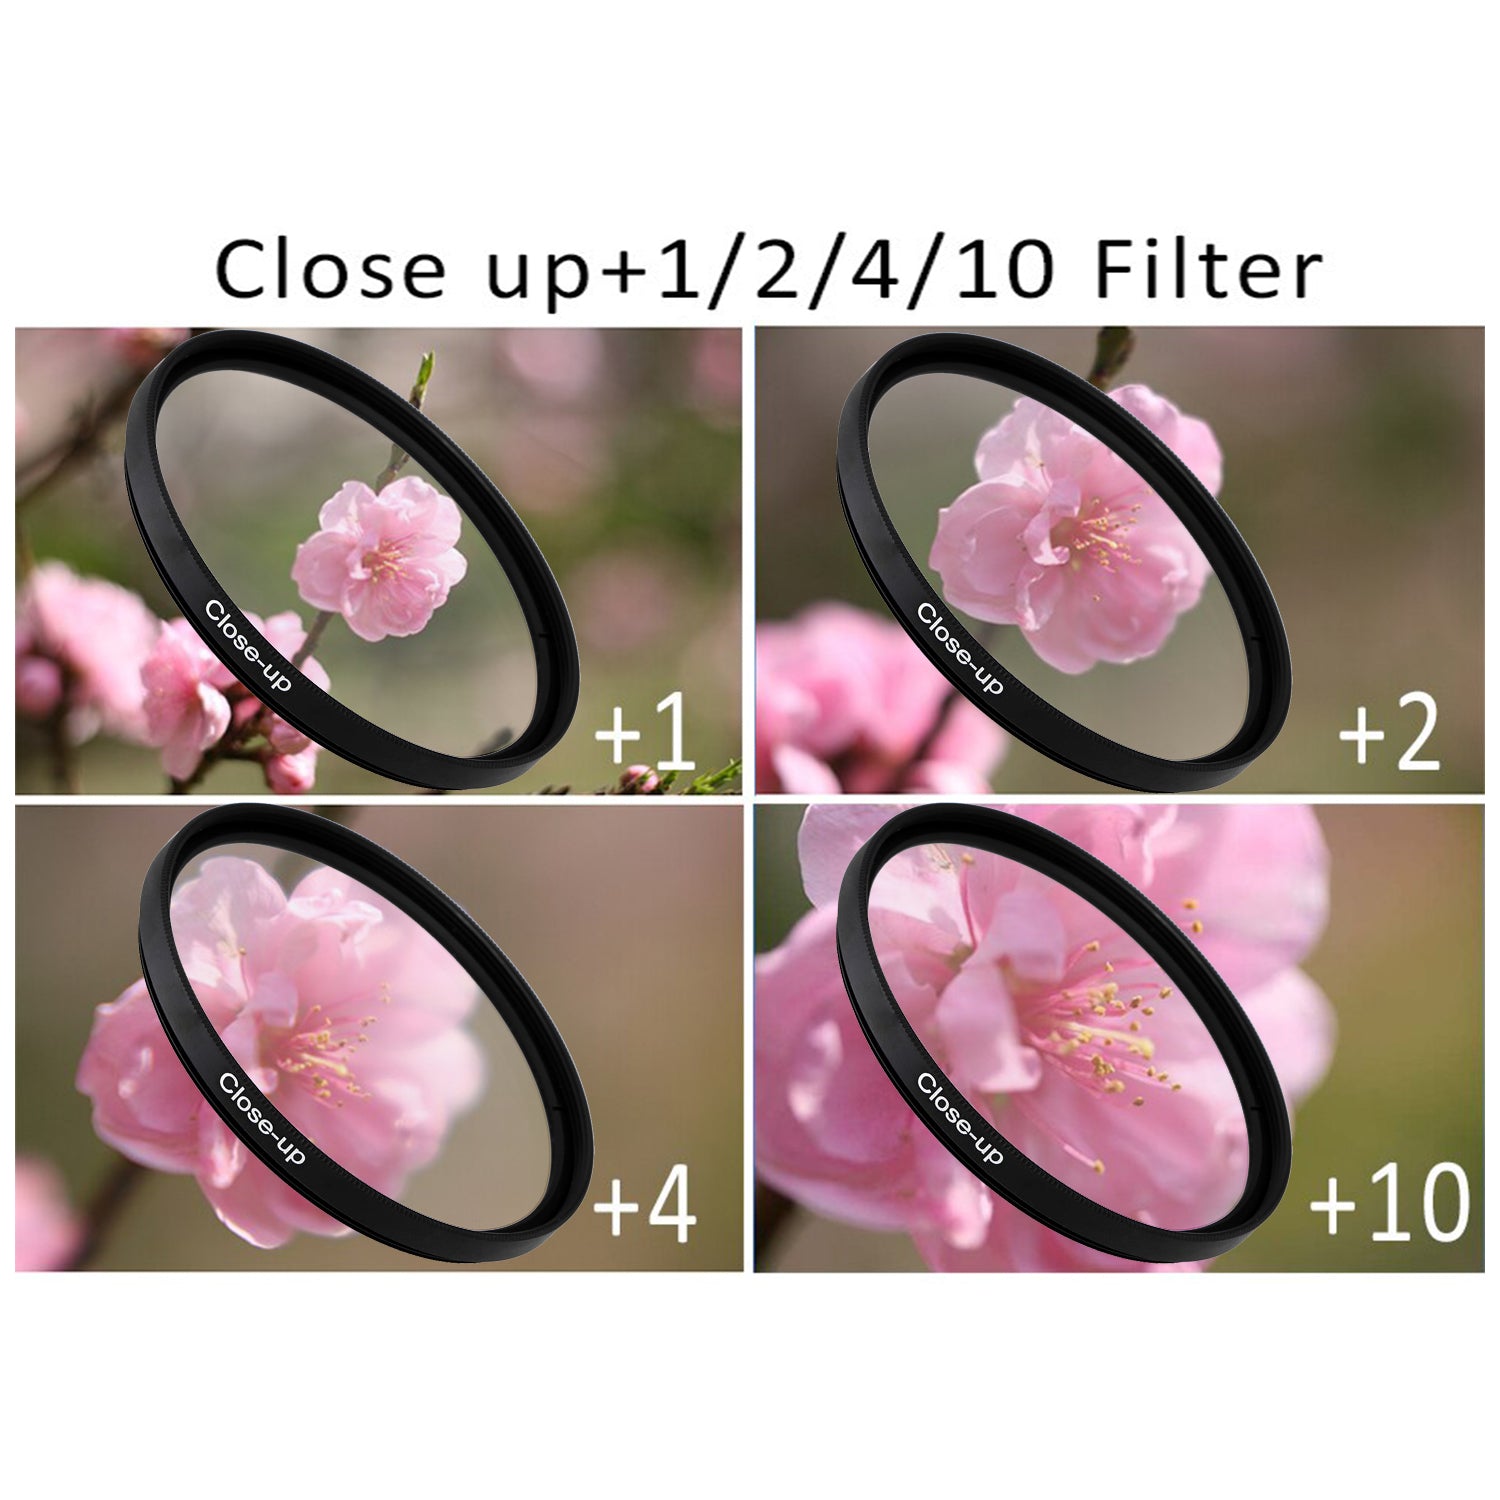 37mm Filter Kit Bundle with Close Up Lens Set, Cleaning Kit, and More